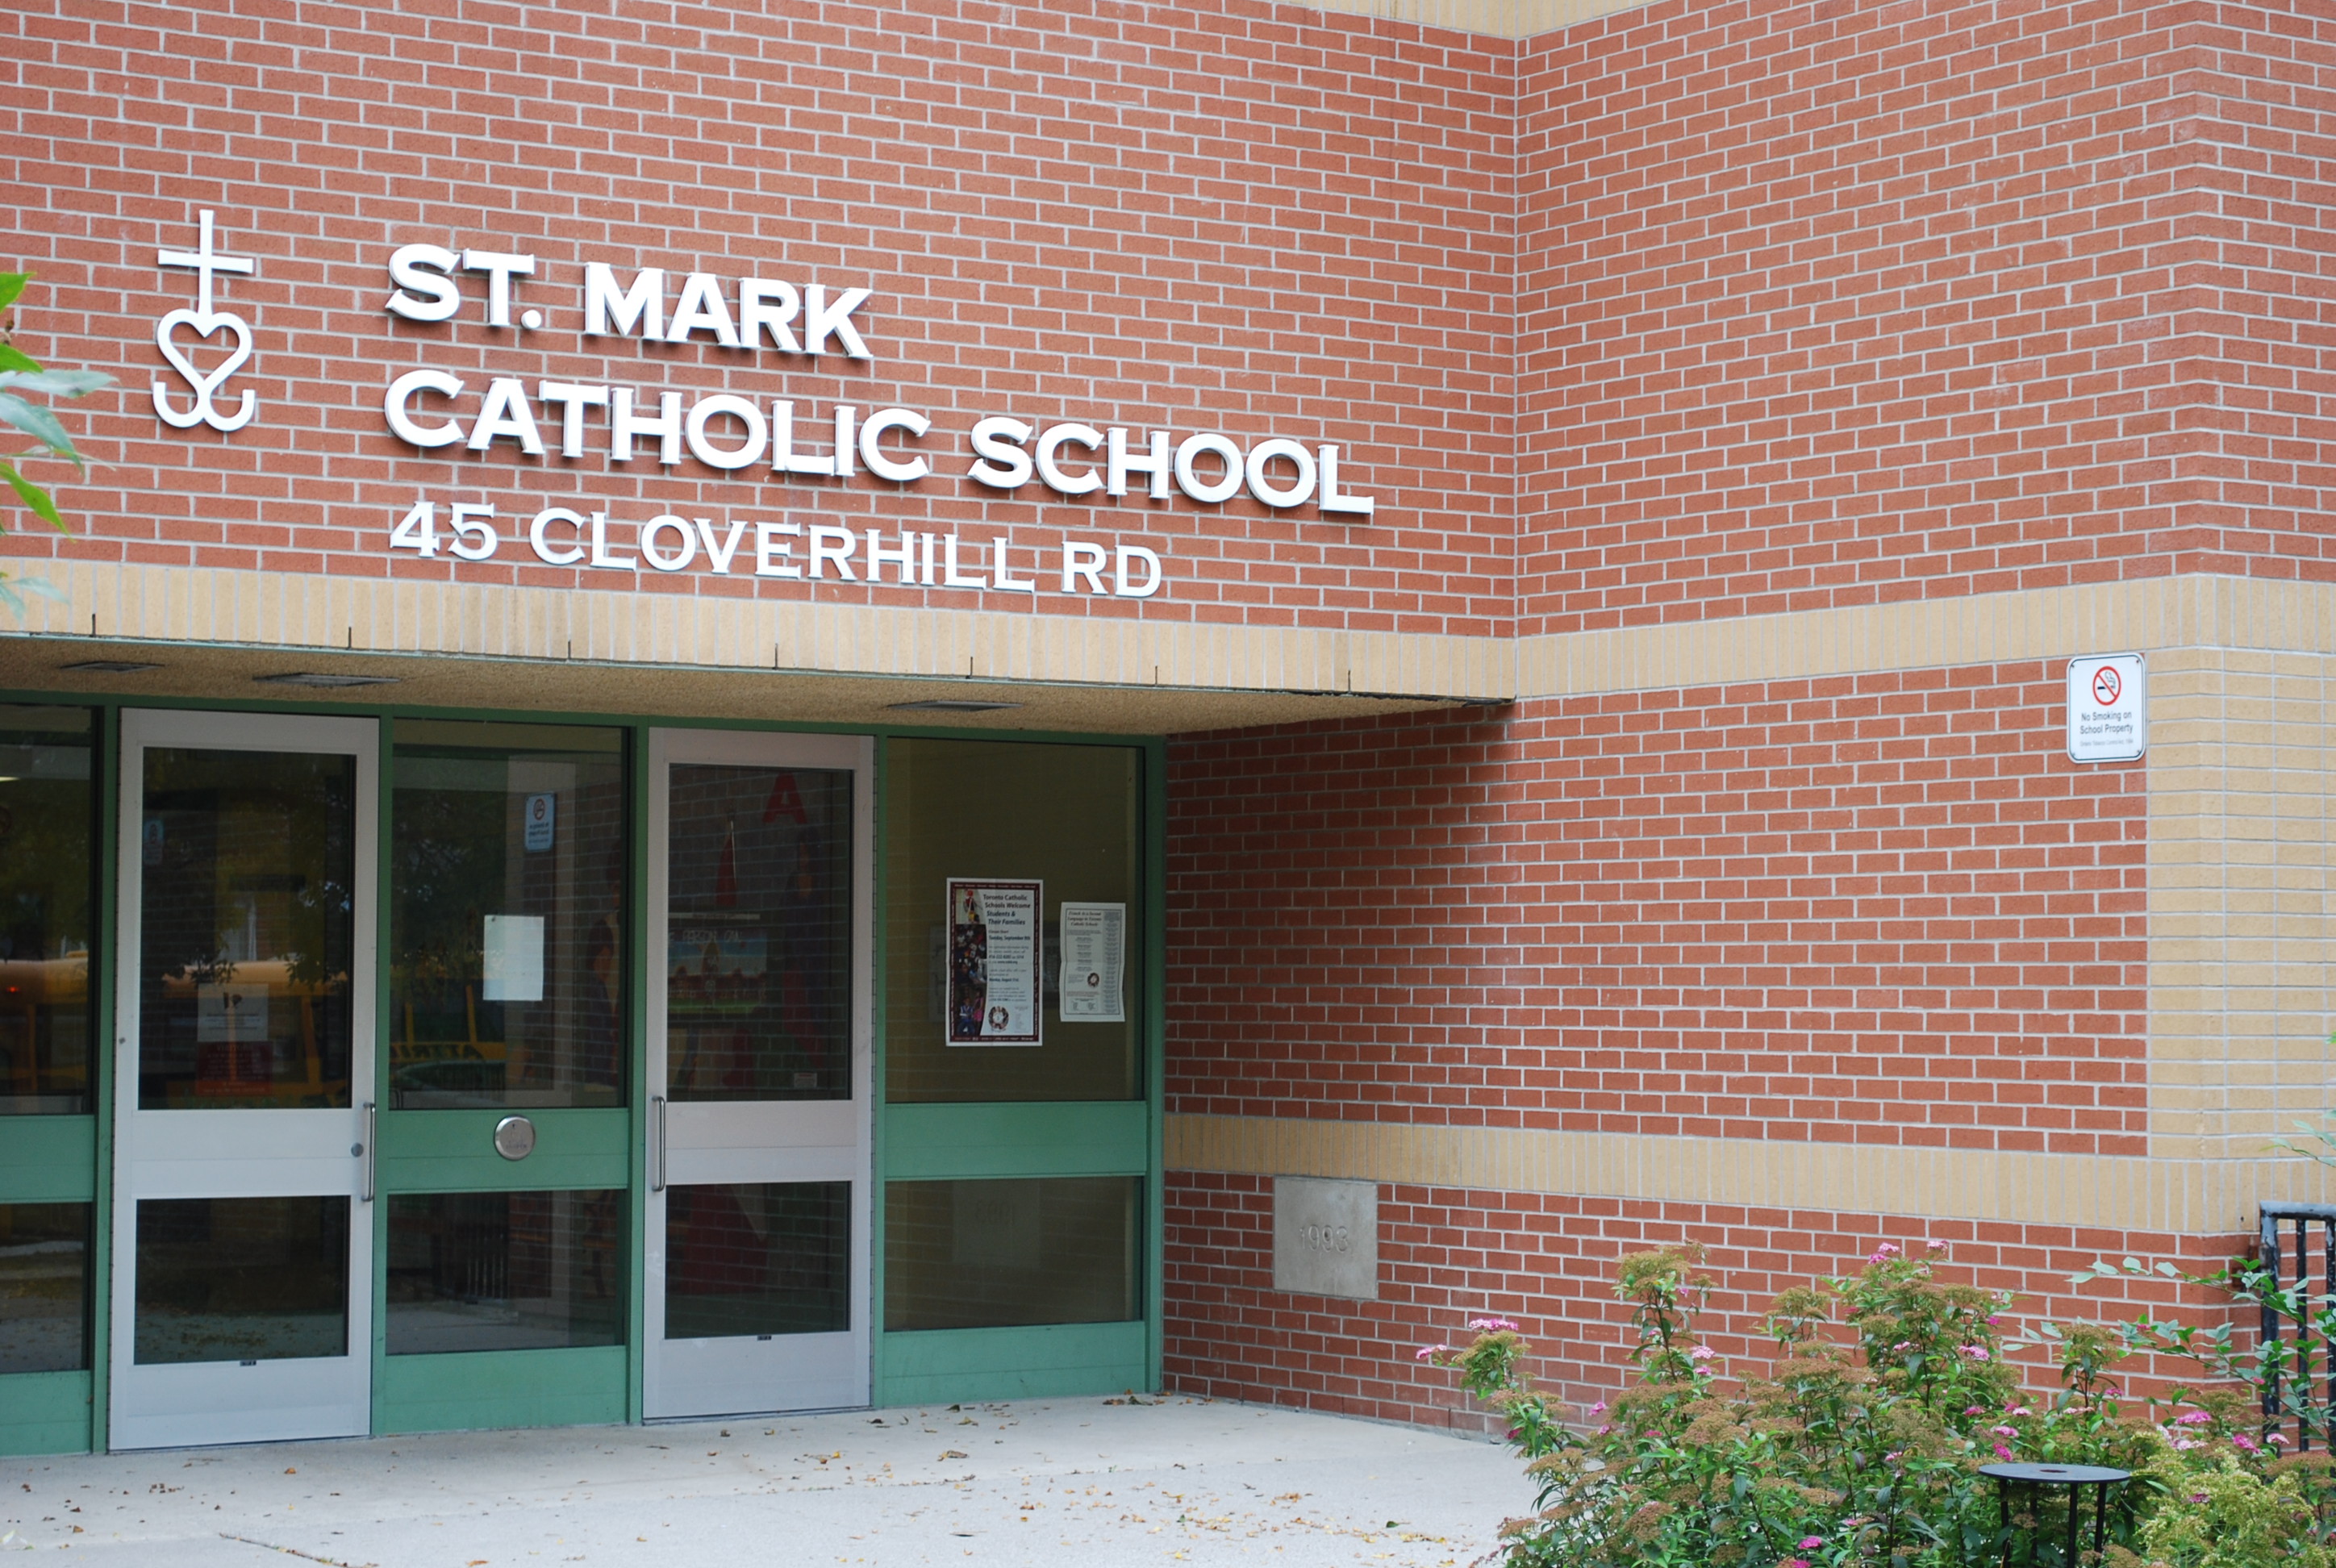 The front of the St. Mark Catholic School building